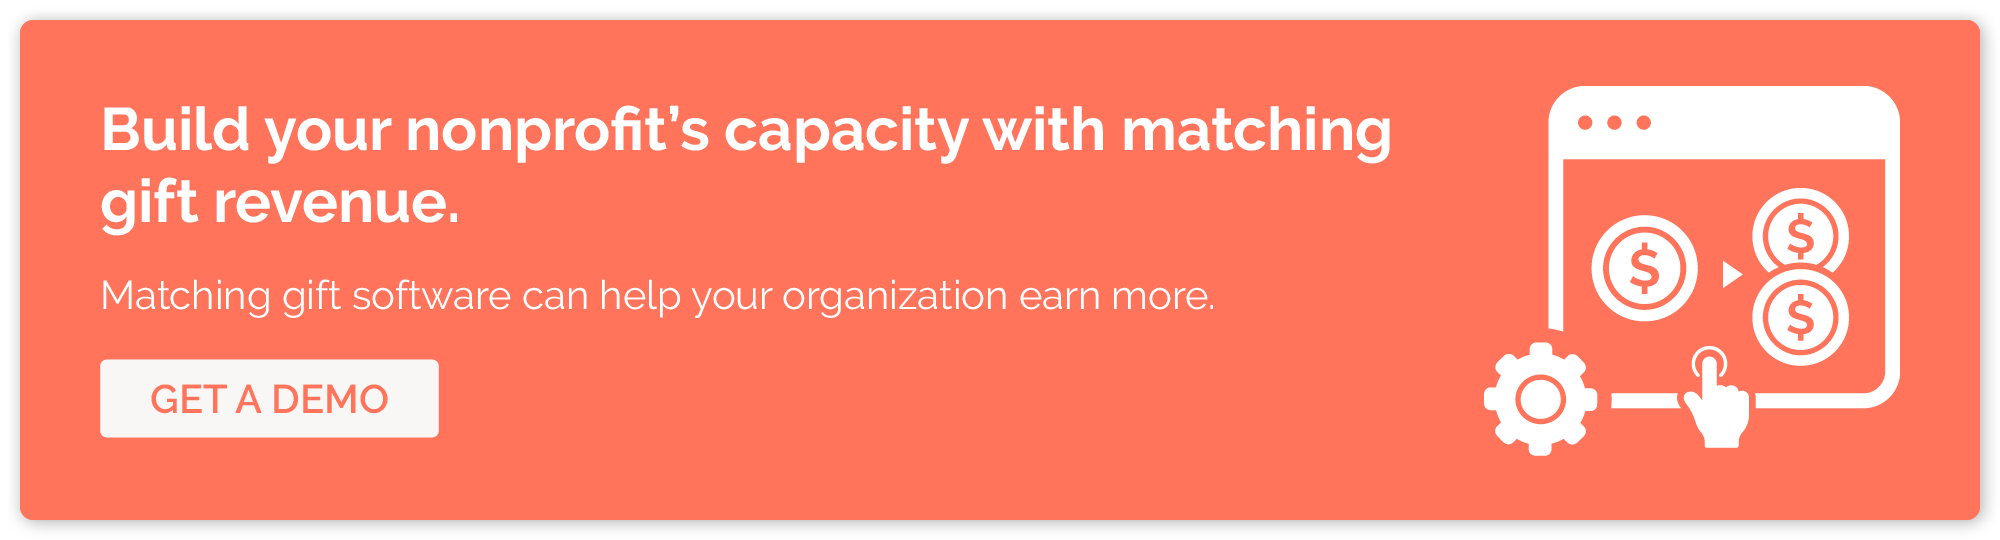 Get a demo of our matching gift software to jumpstart your nonprofit capacity building.